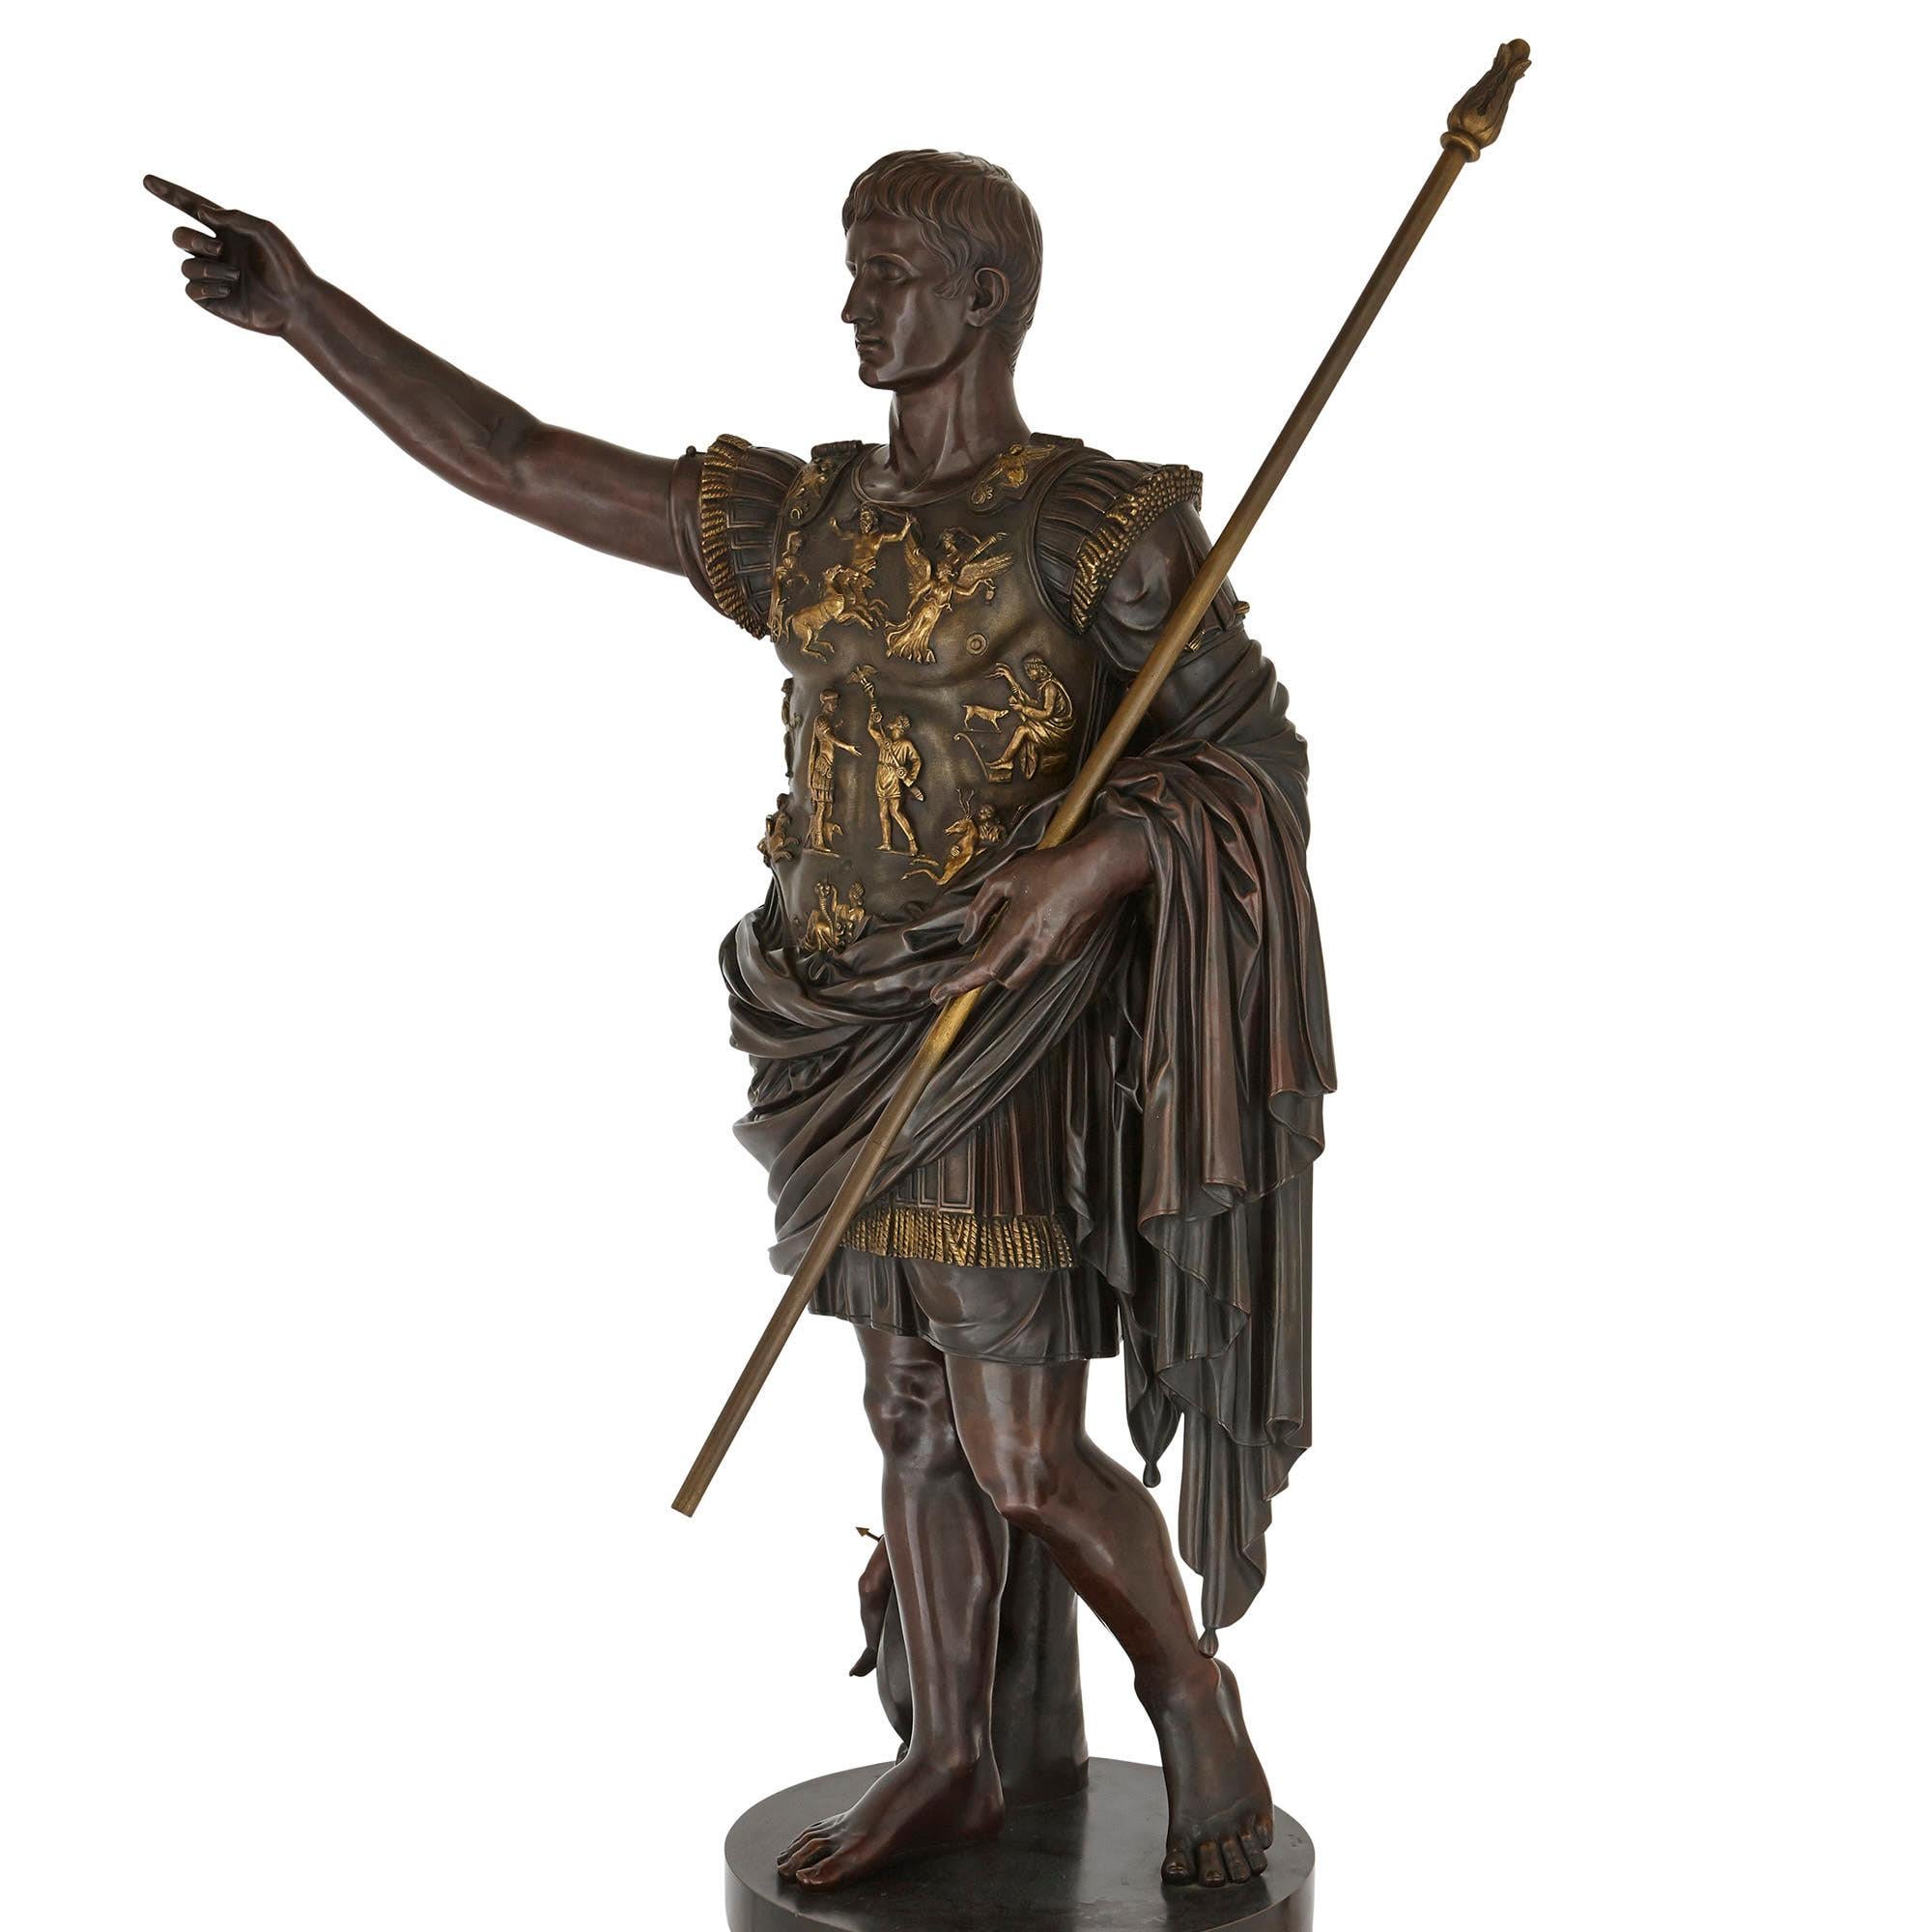 Known as the ‘Augustus of Prima Porta,’ the original bronze version of this sculpture was created c. 20 BCE. That original has been lost since antiquity but is known today from a marble copy made a decade or two after the creation of the original.